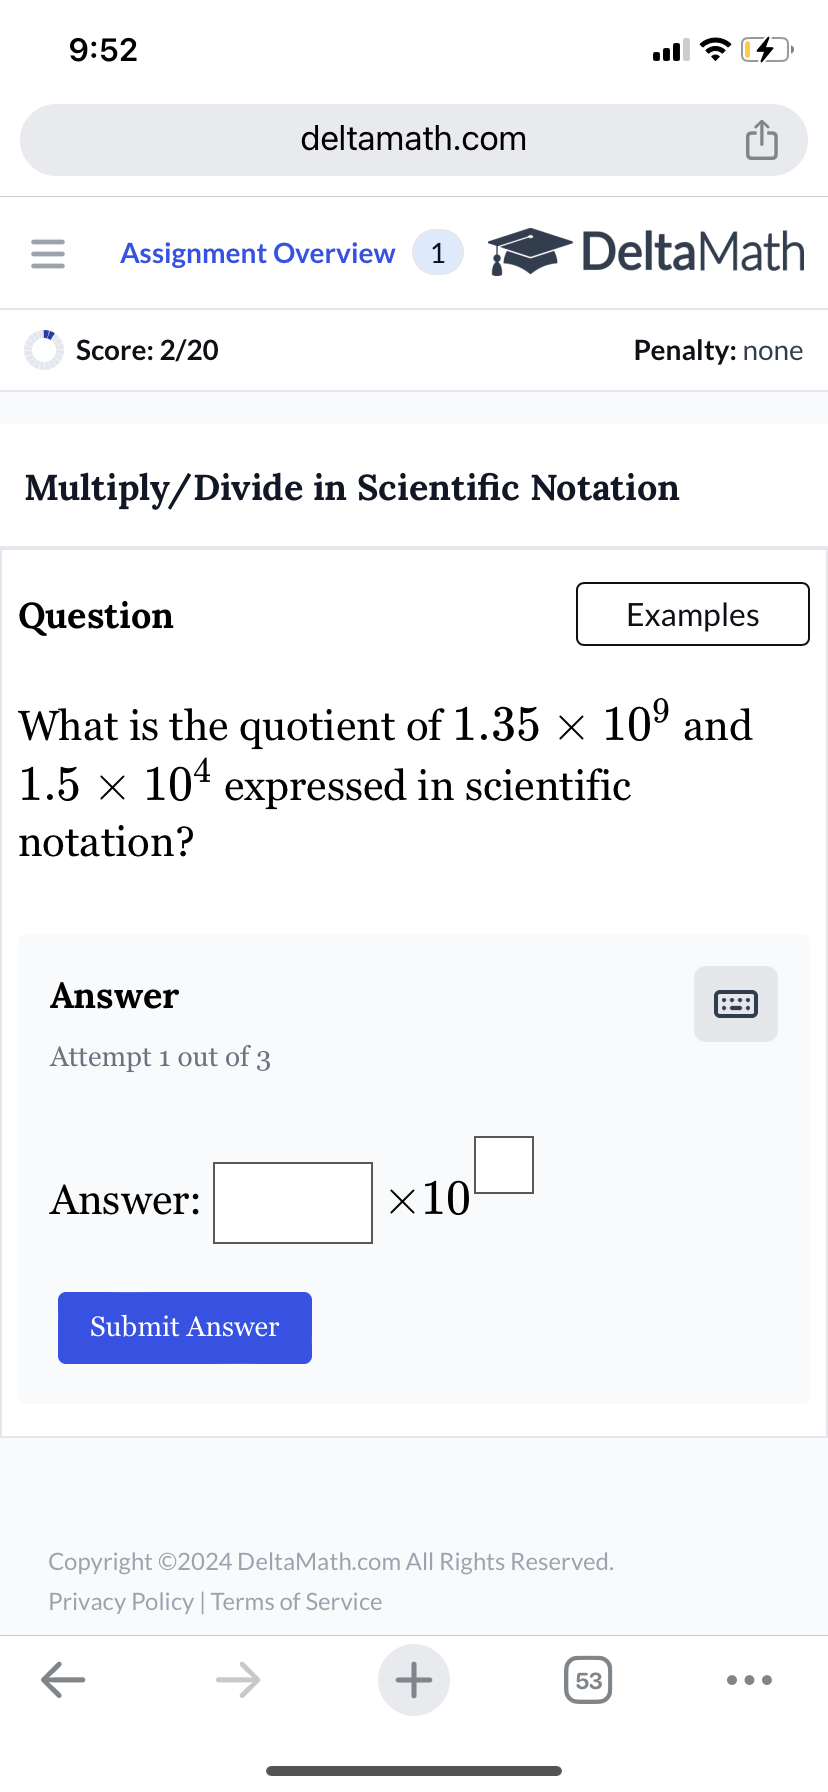 9:52
deltamath.com
m
= Assignment Overview 1
DeltaMath
Score: 2/20
Penalty: none
Multiply/Divide in Scientific Notation
Question
Examples
What is the quotient of 1.35 × 109 and
1.5 × 104 expressed in scientific
notation?
Answer
Attempt 1 out of 3
Answer:
Submit Answer
×10
Copyright ©2024 DeltaMath.com All Rights Reserved.
Privacy Policy | Terms of Service
←
+
53